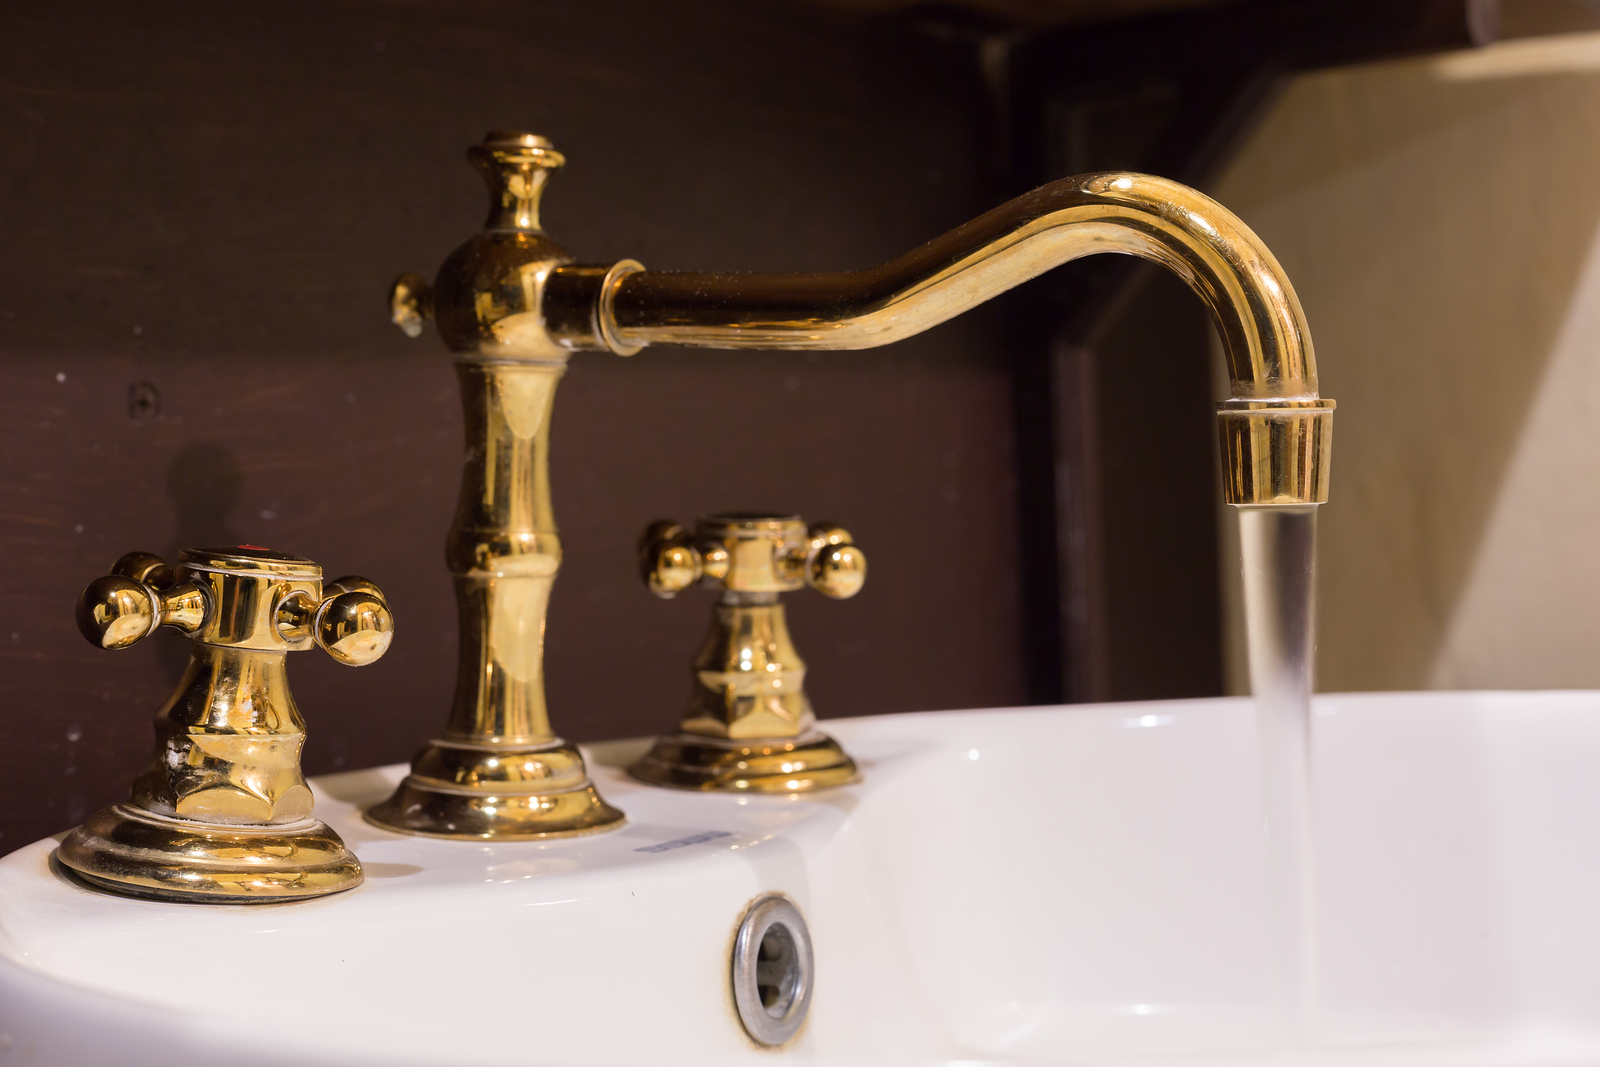 Gold Faucet And Washbasin Design Retro Vintage Decorated Luxury